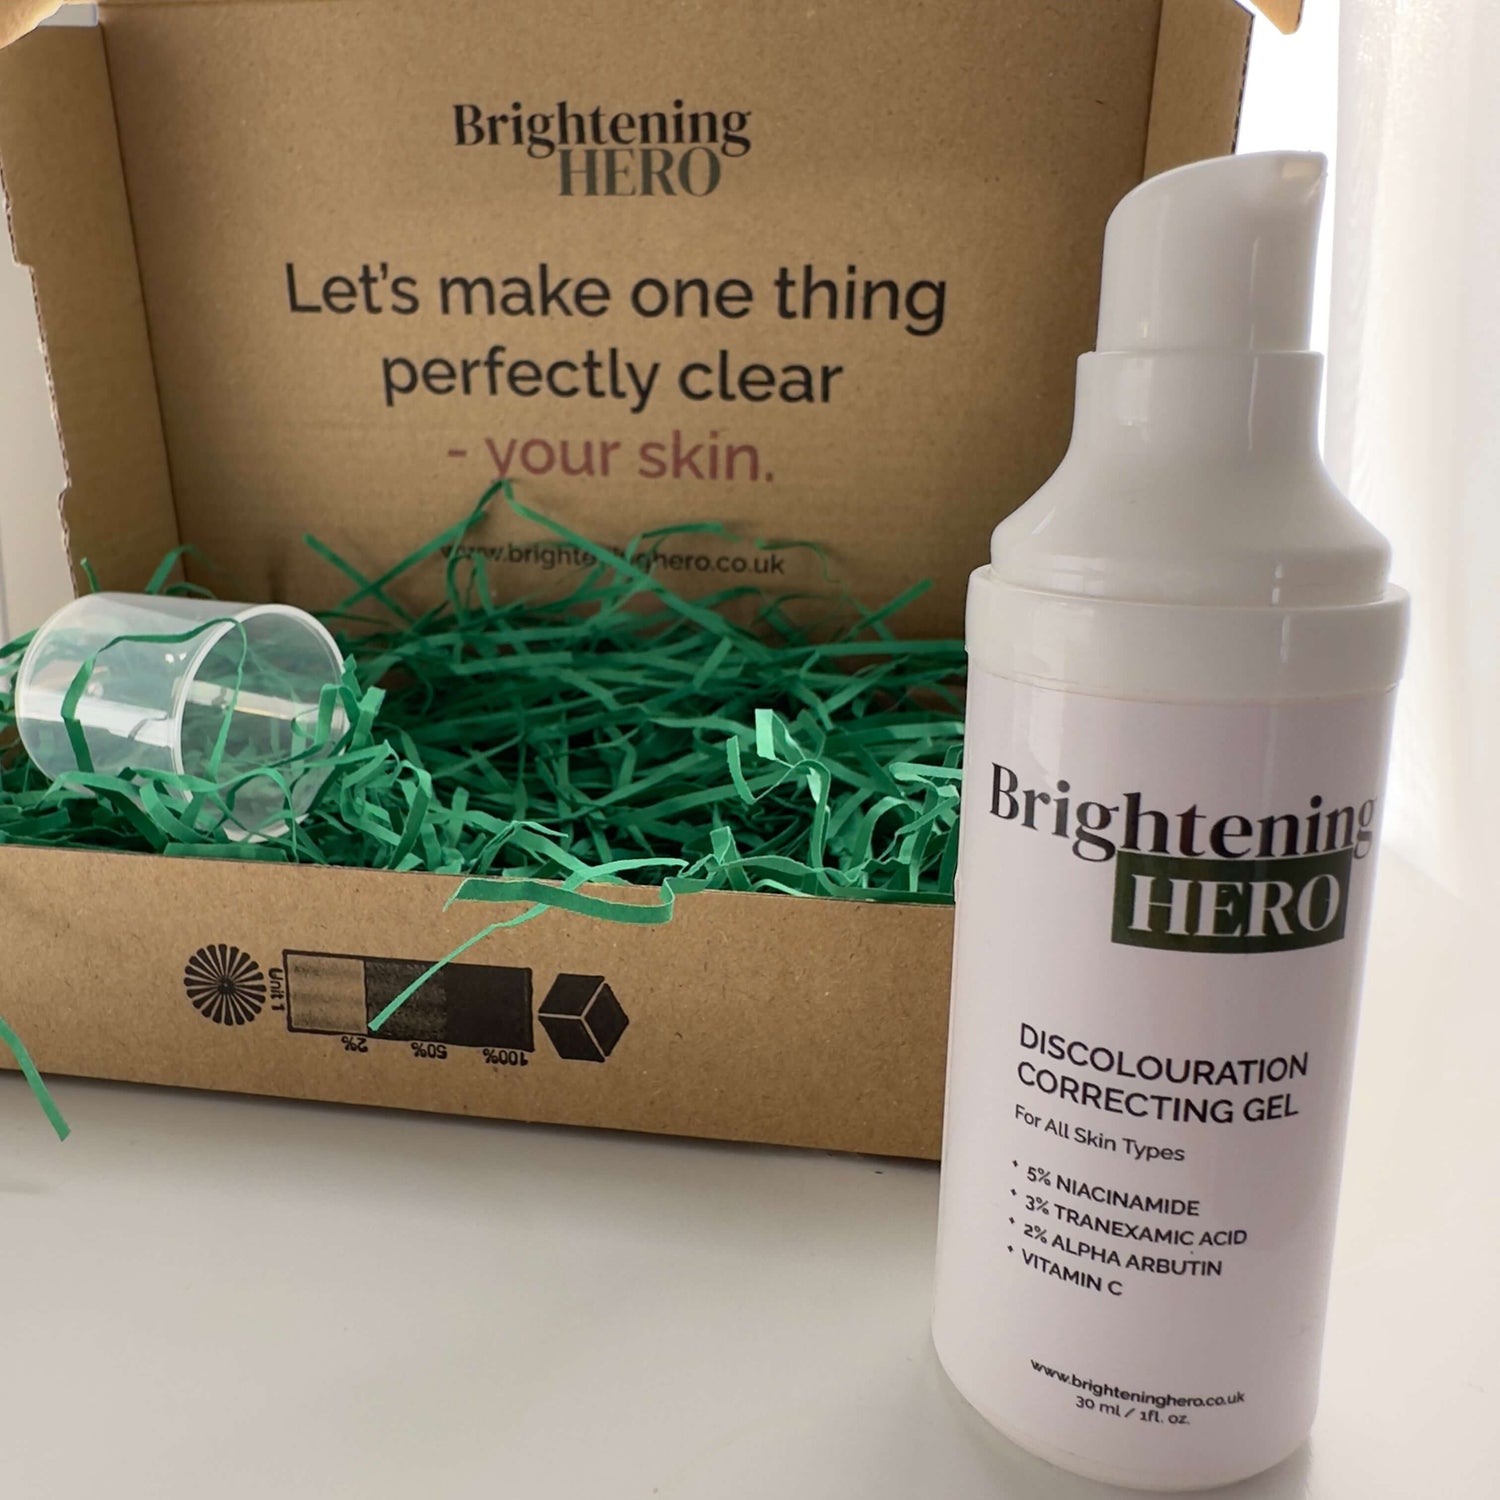 Brightening Hero discolouratin gel box and package